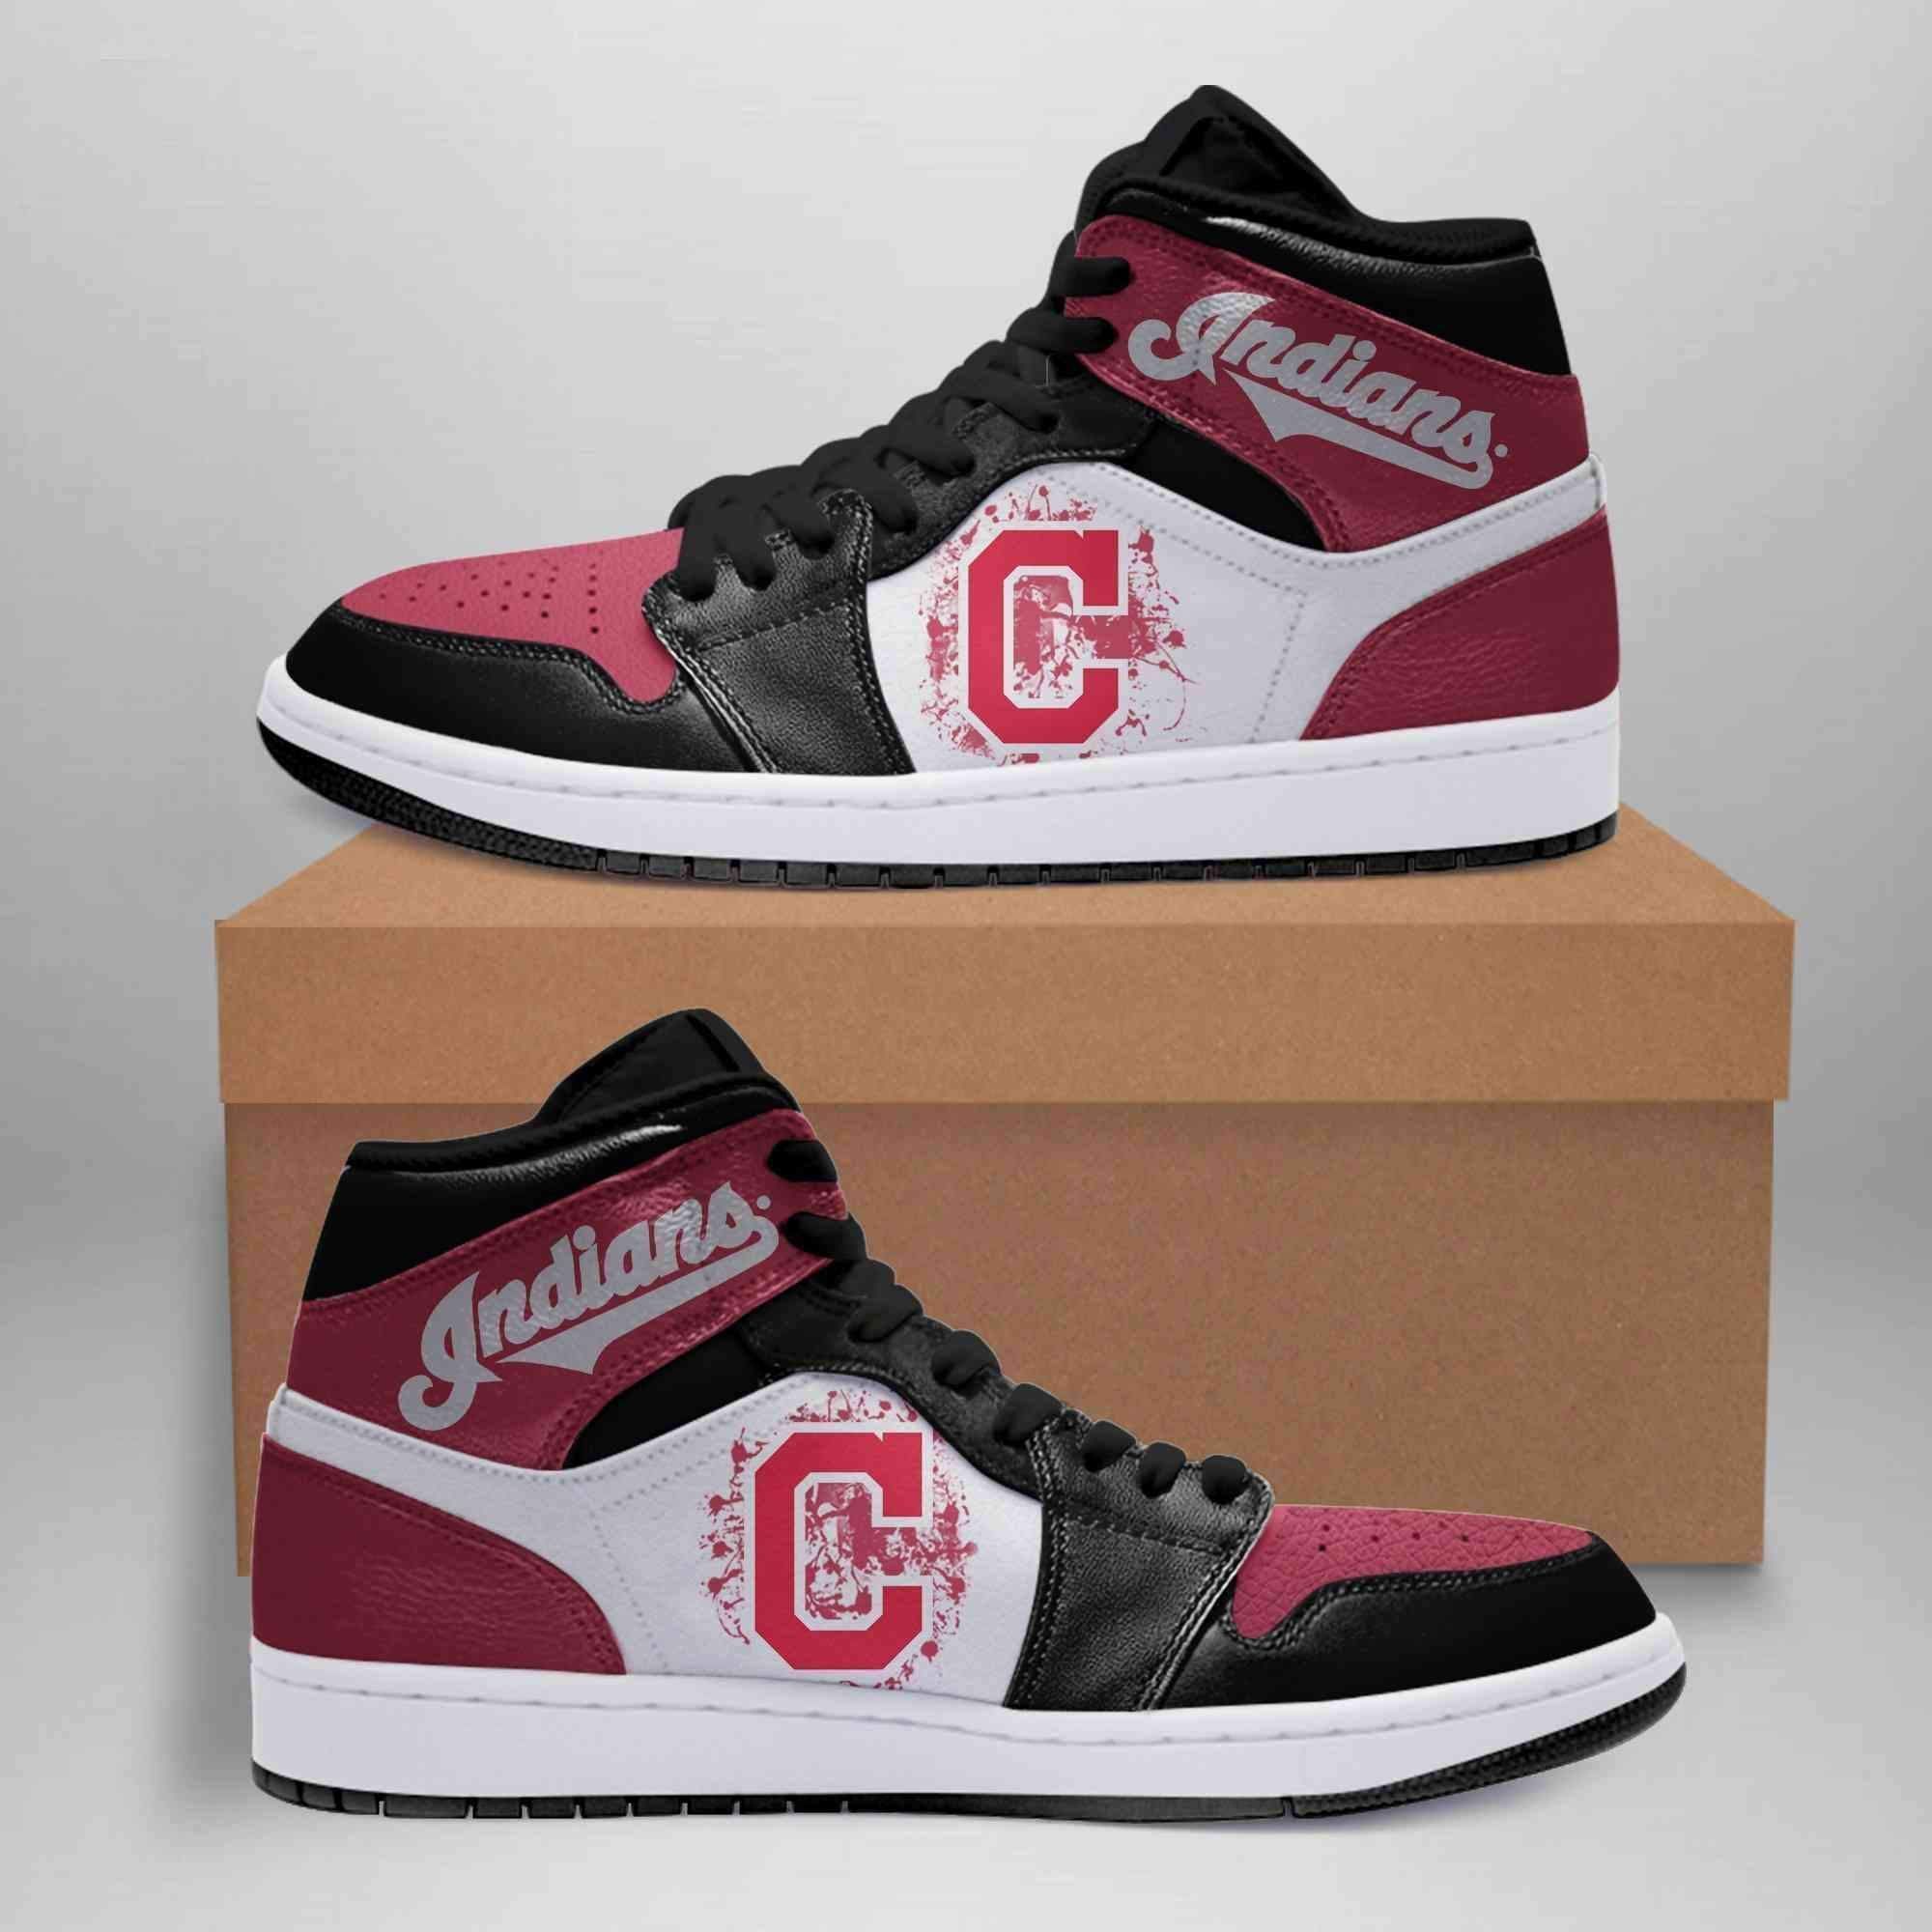 Cleveland Indians 02 Mlb Air Jordan Shoes Sport Sneakers